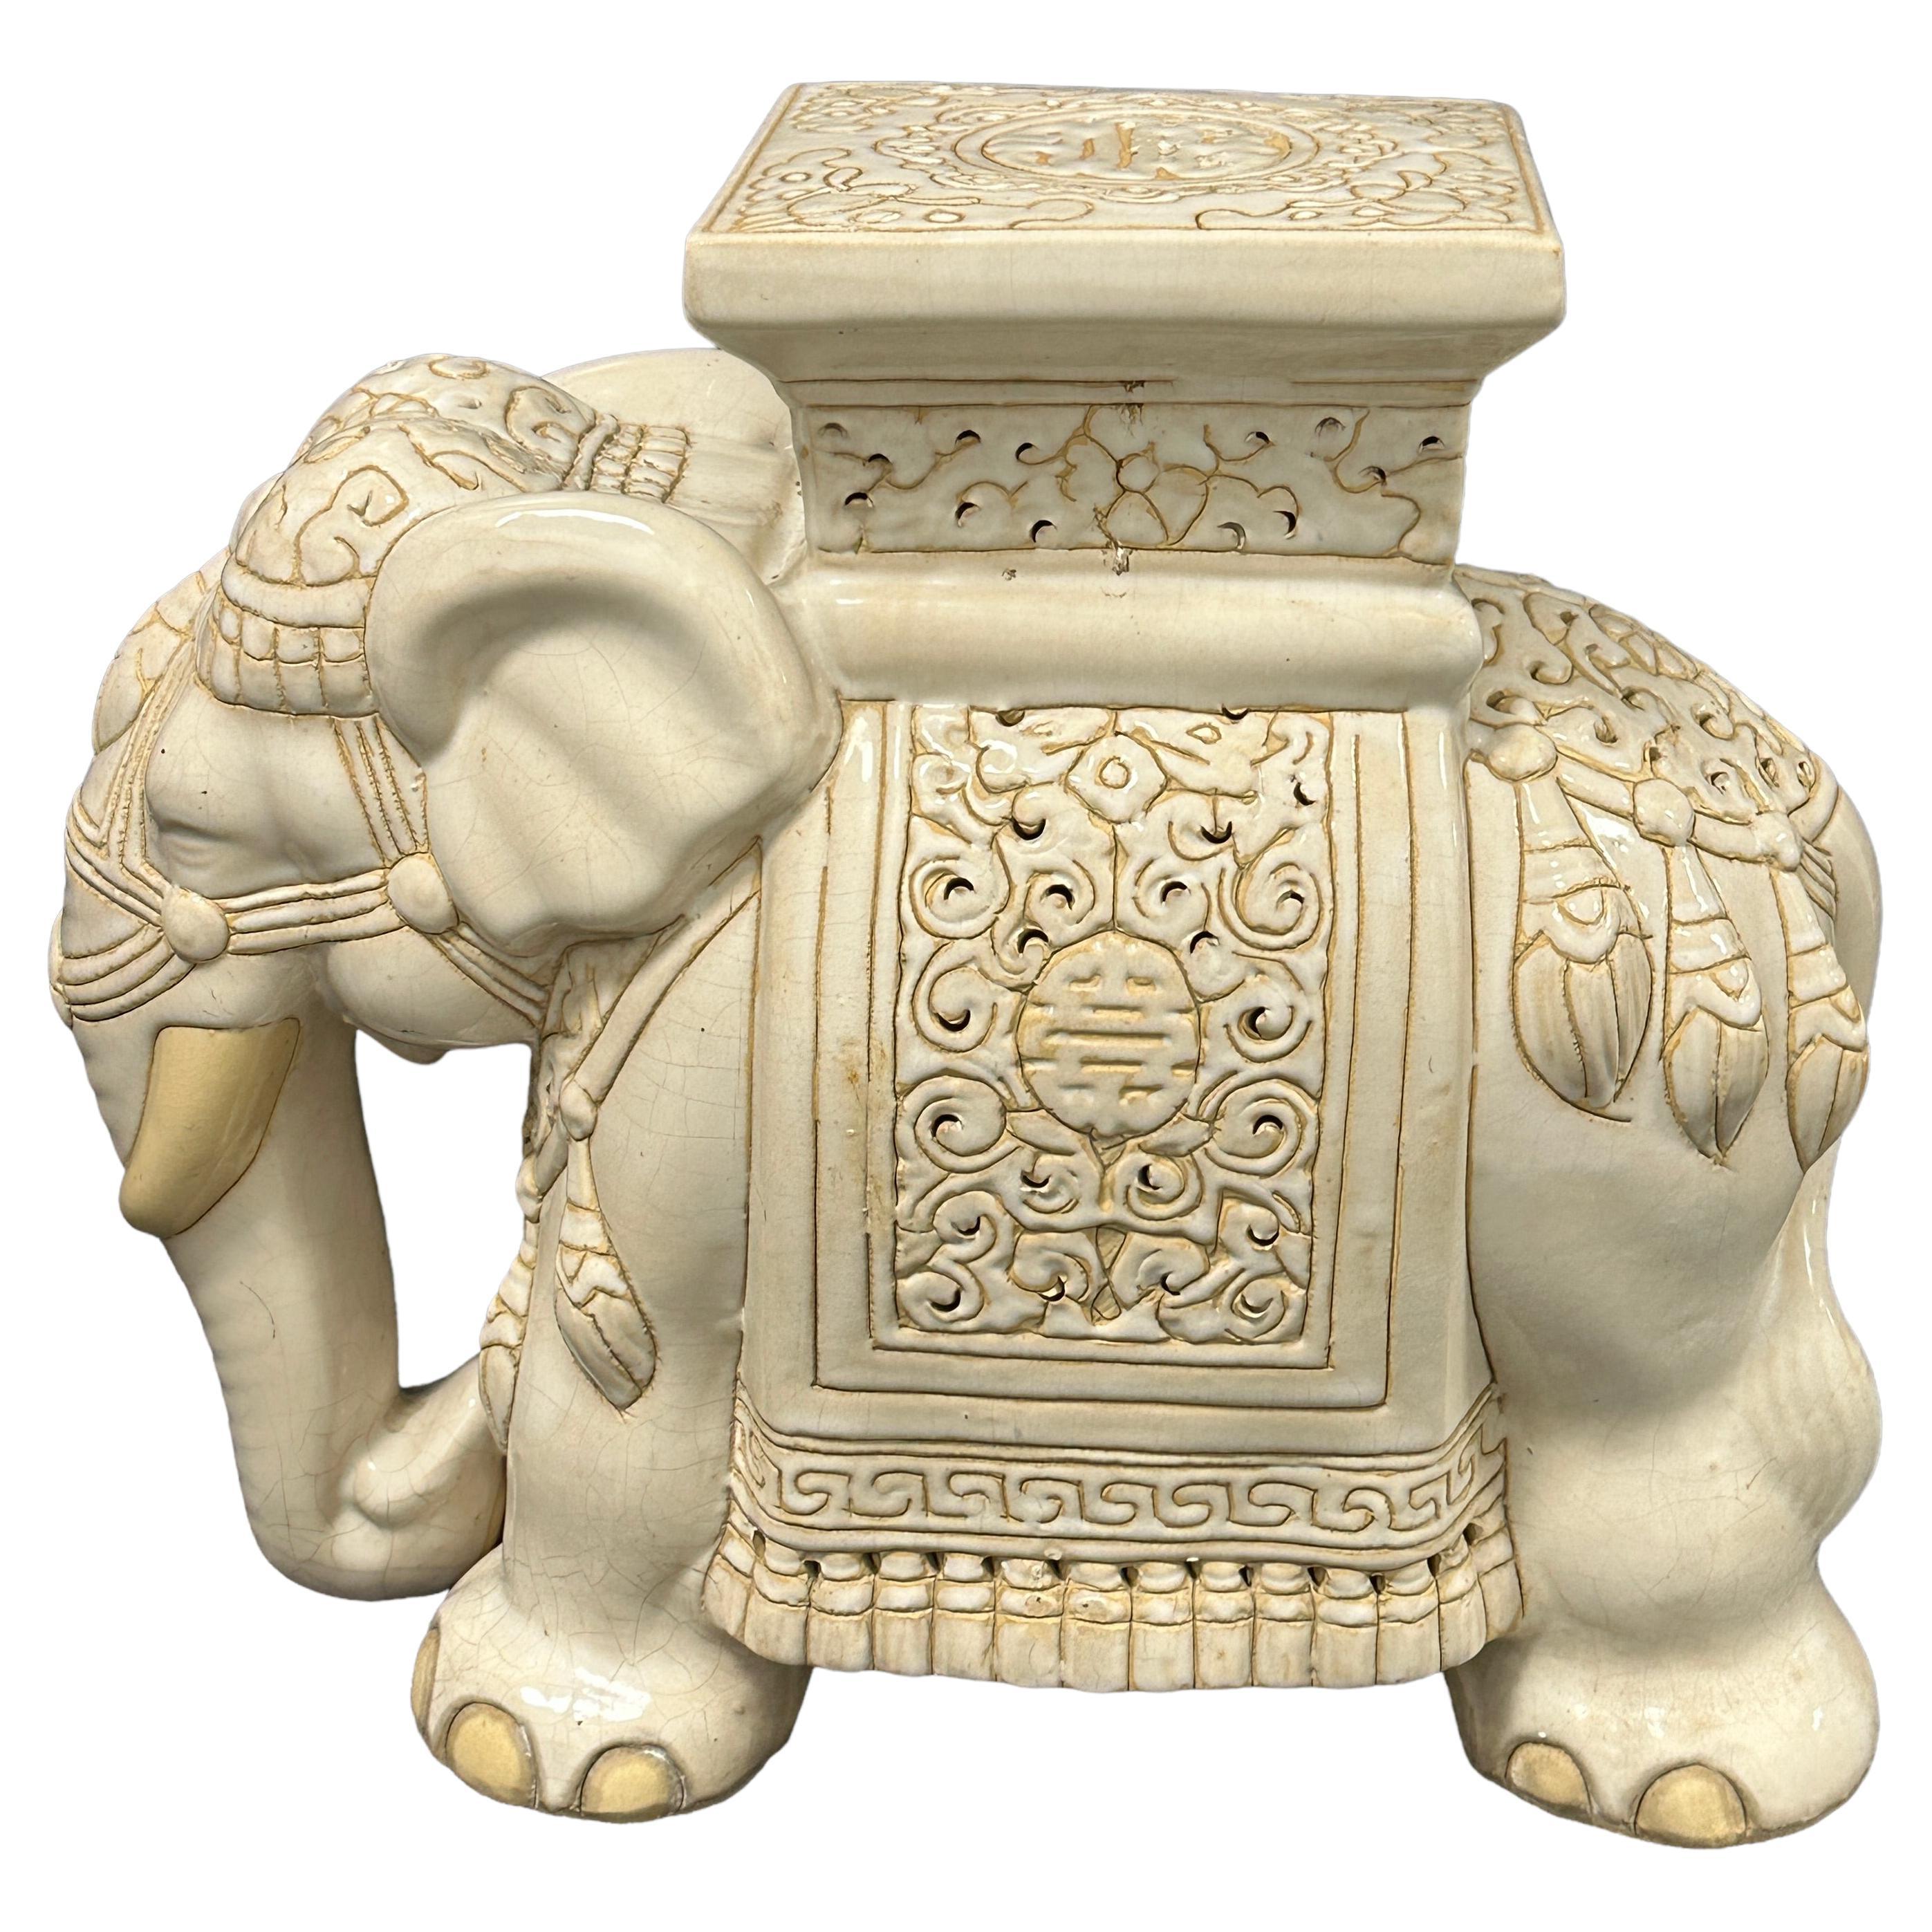 Hollywood Regency Chinese Ivory Colored Elephant Garden Plant Stand or Seat